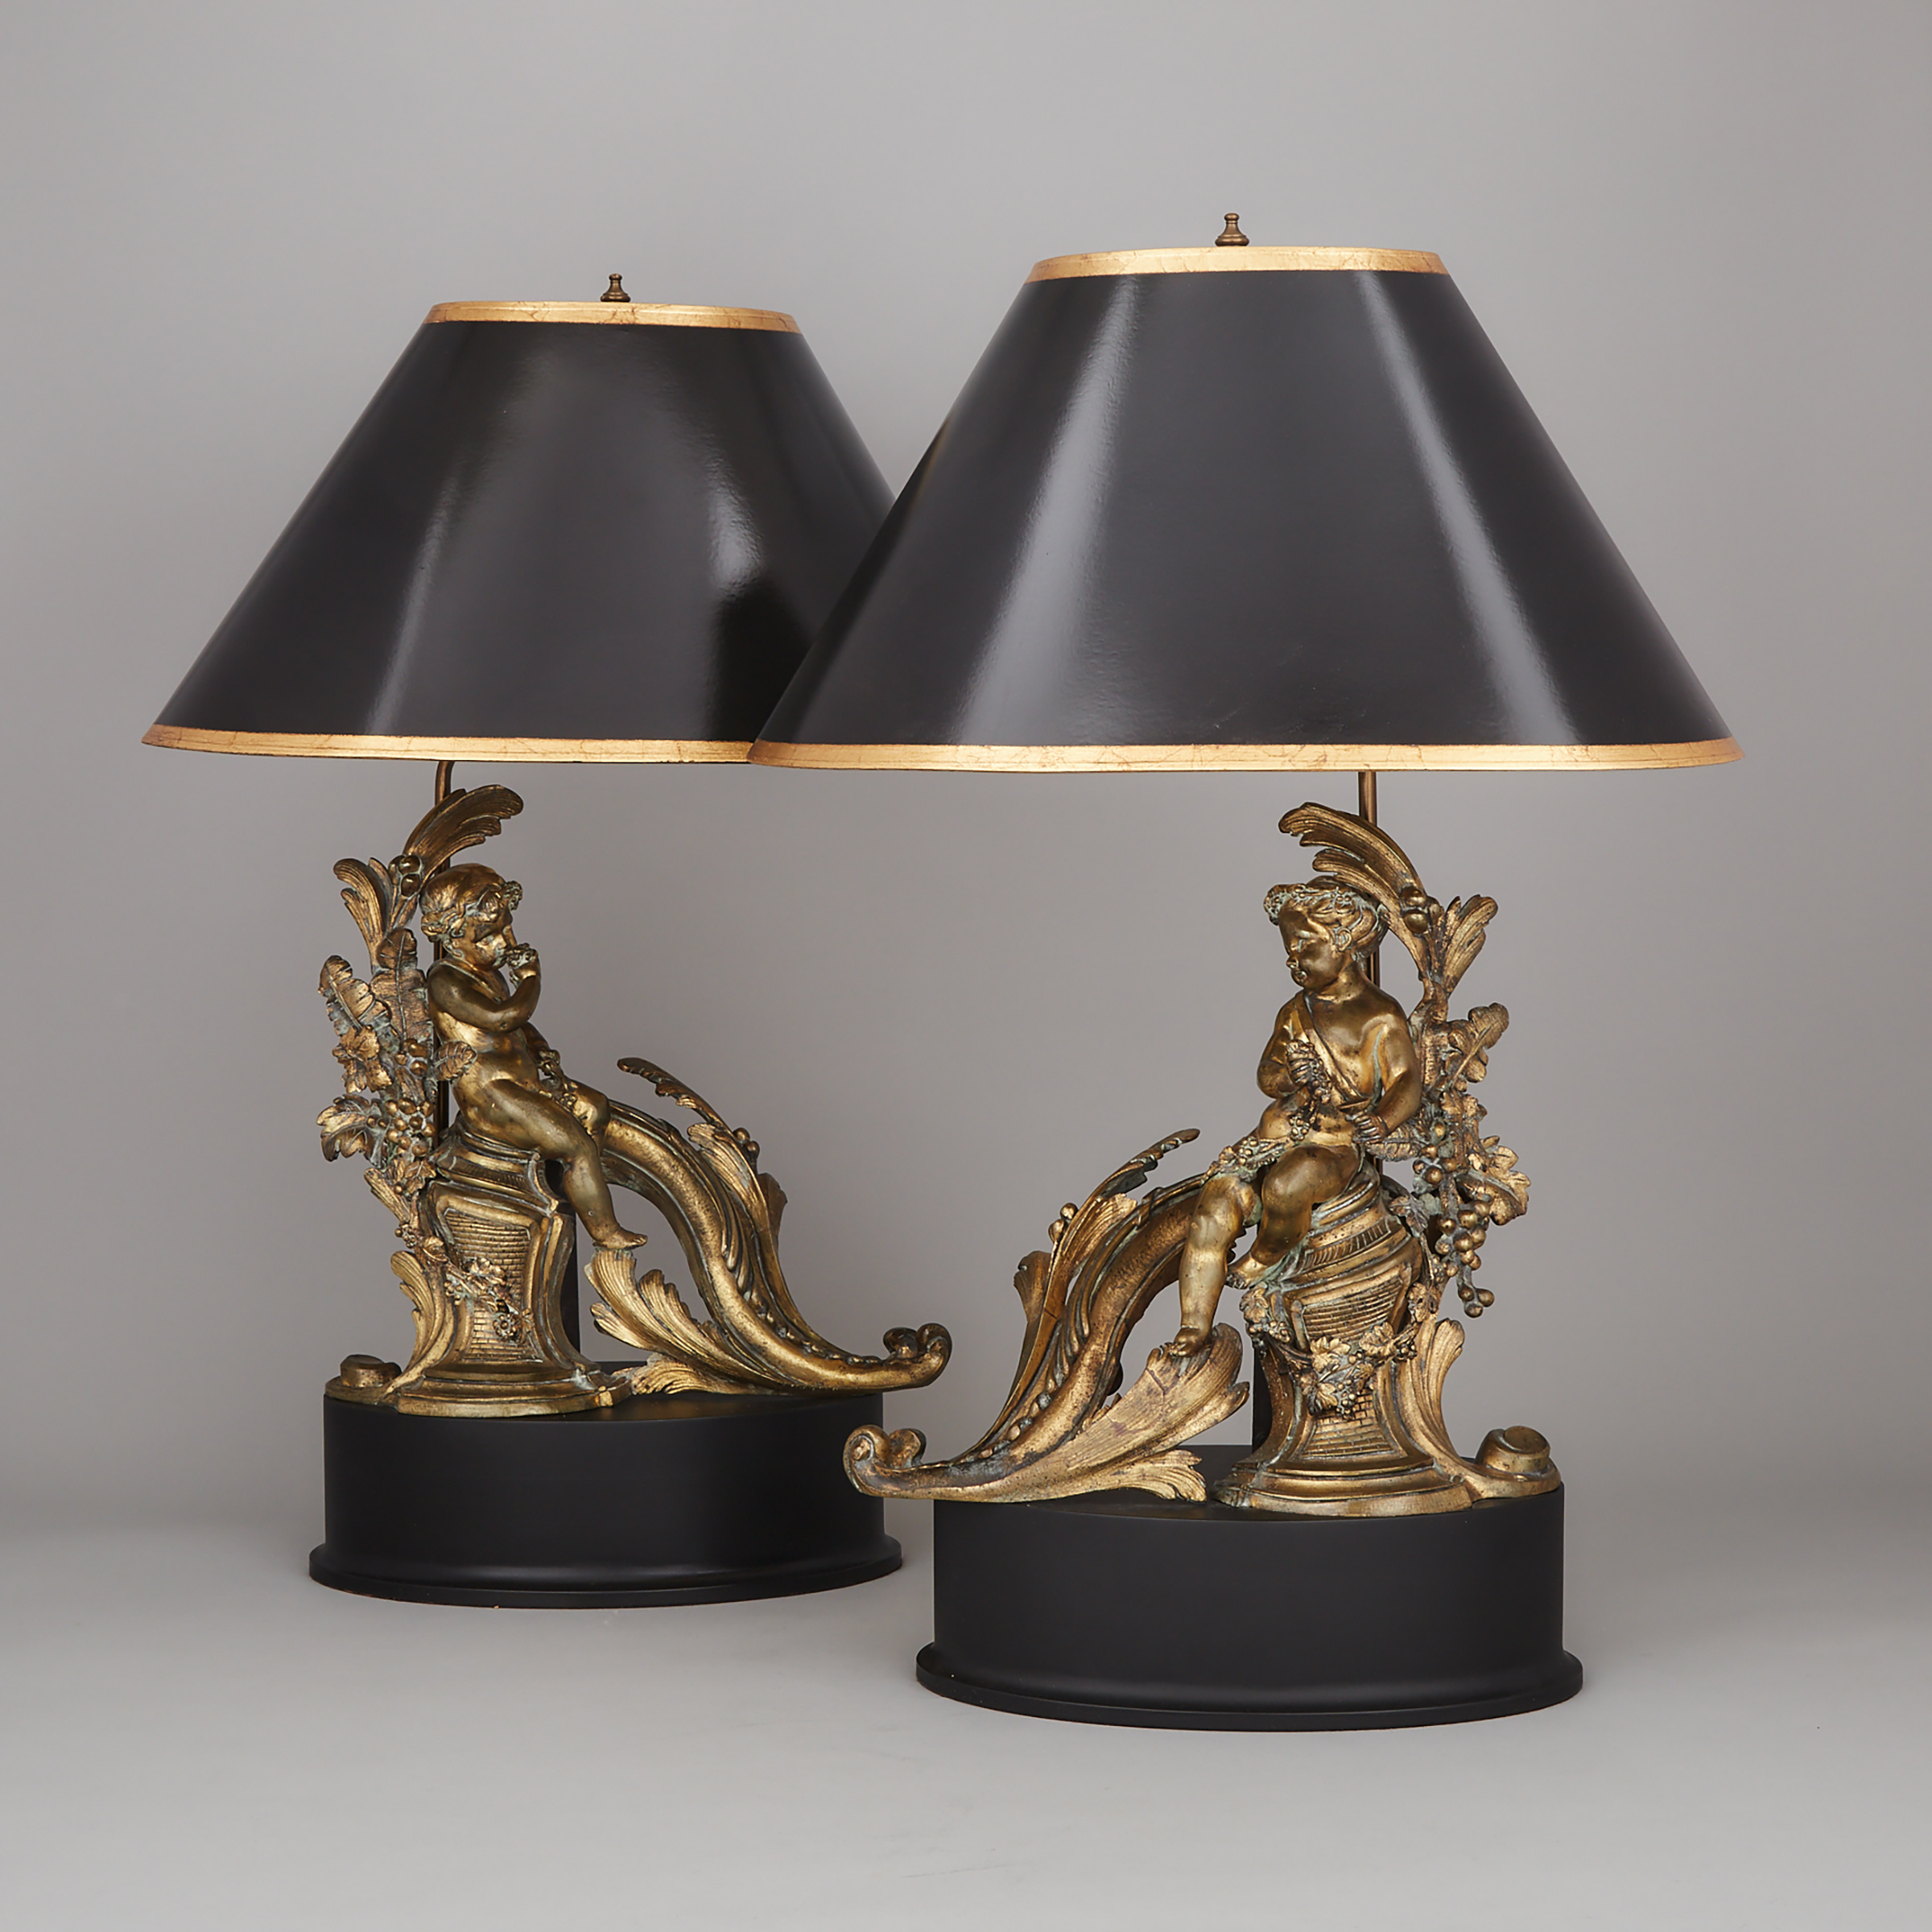 Pair of French Gilt Bronze Figural Chenets, 19th century